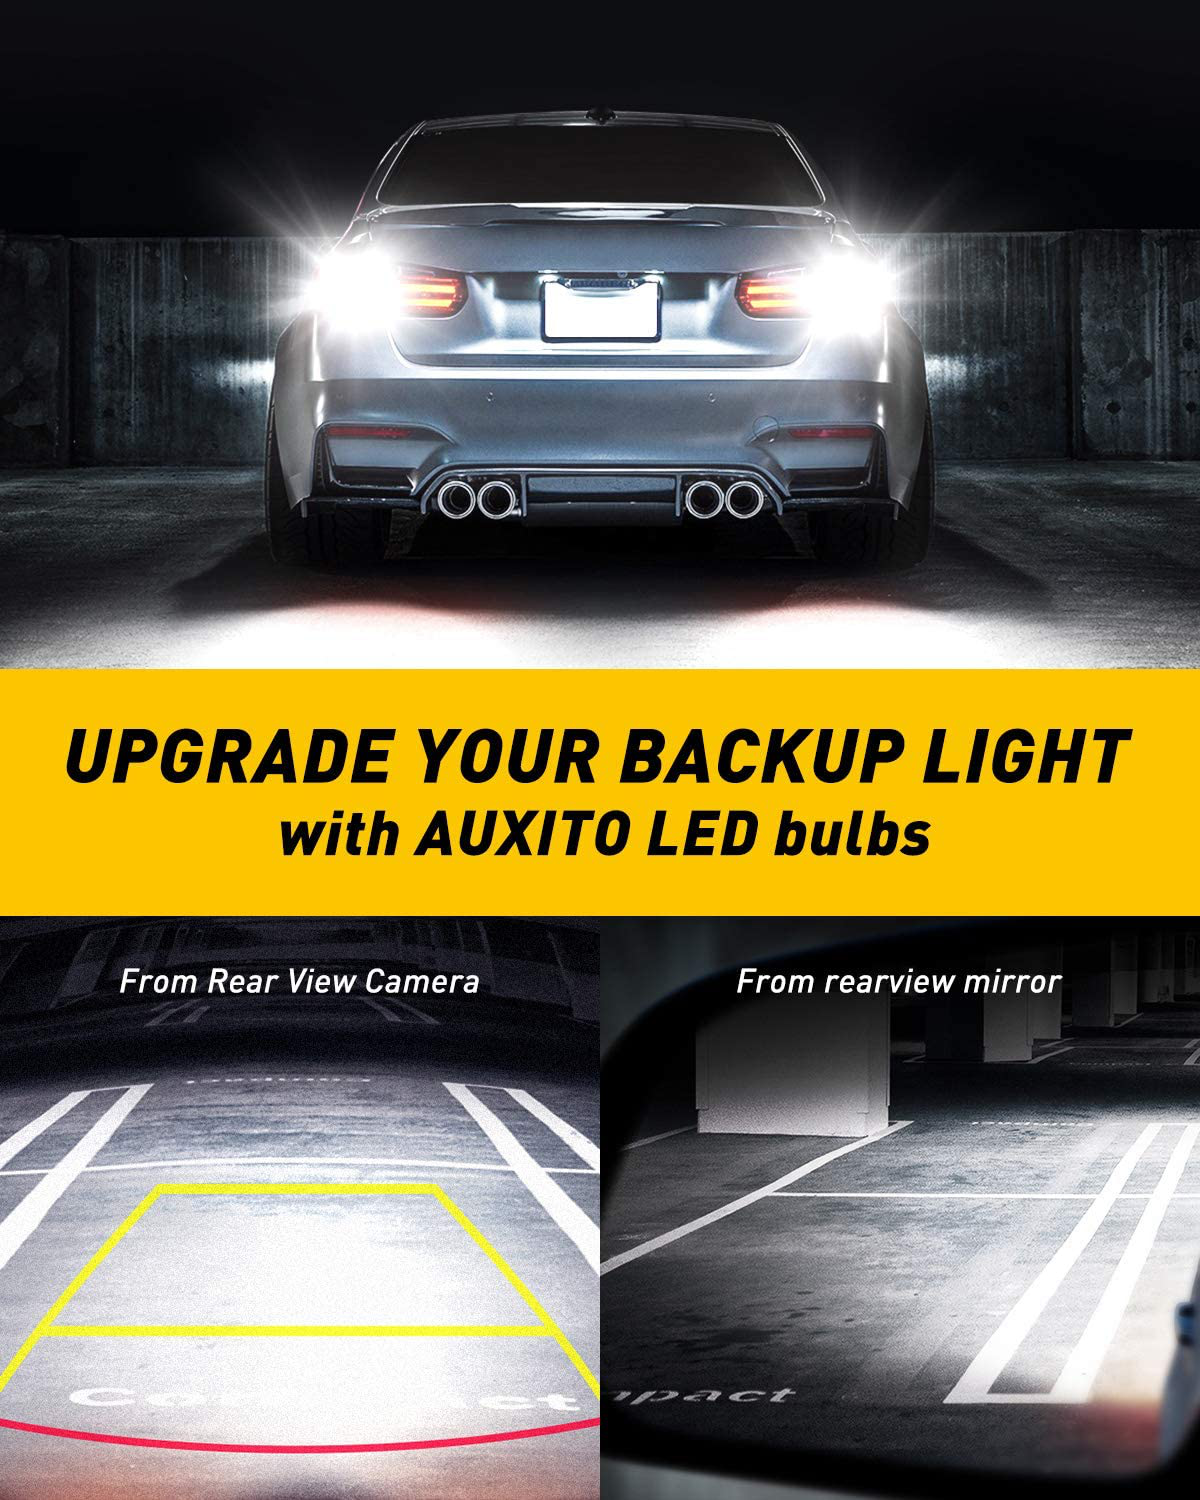 AUXITO 912 921 LED Backup Light Bulbs High Power 2835 15-SMD Chipsets Error Free T15 906 W16W for Back Up Lights Reverse Lights, 6000K White (Upgraded, Pack of 2)